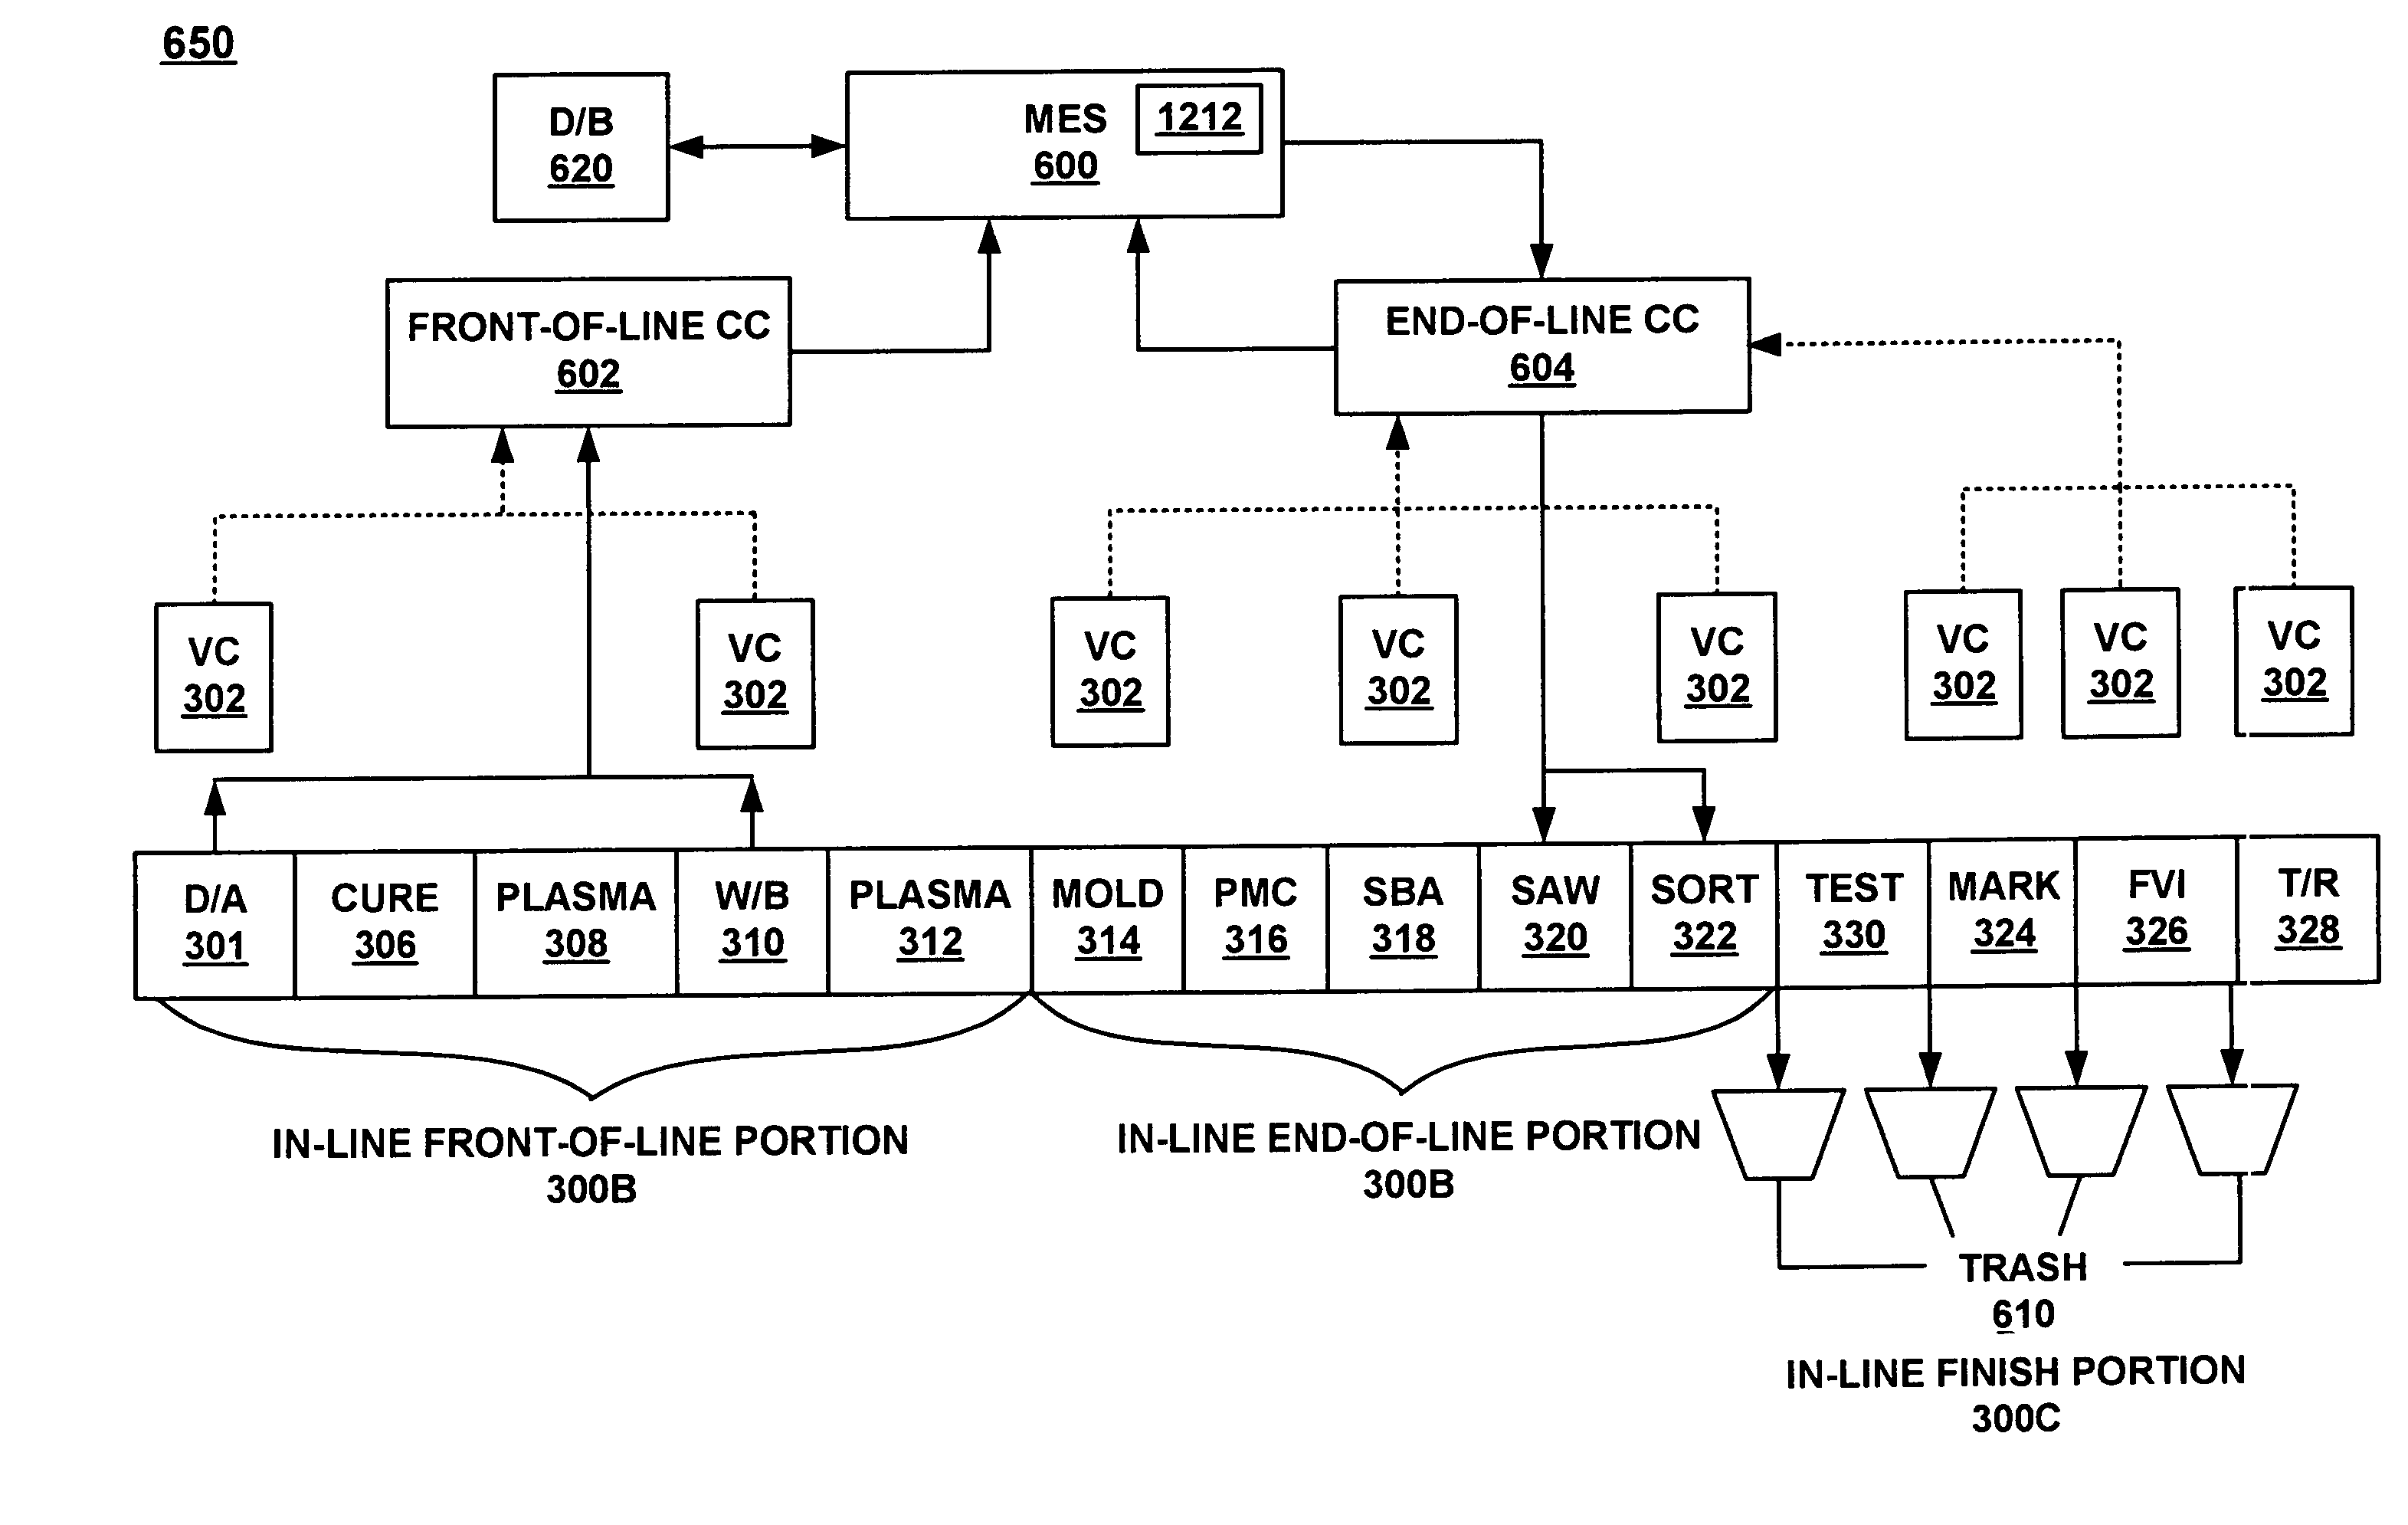 System for controlling the processing of an integrated circuit chip assembly line